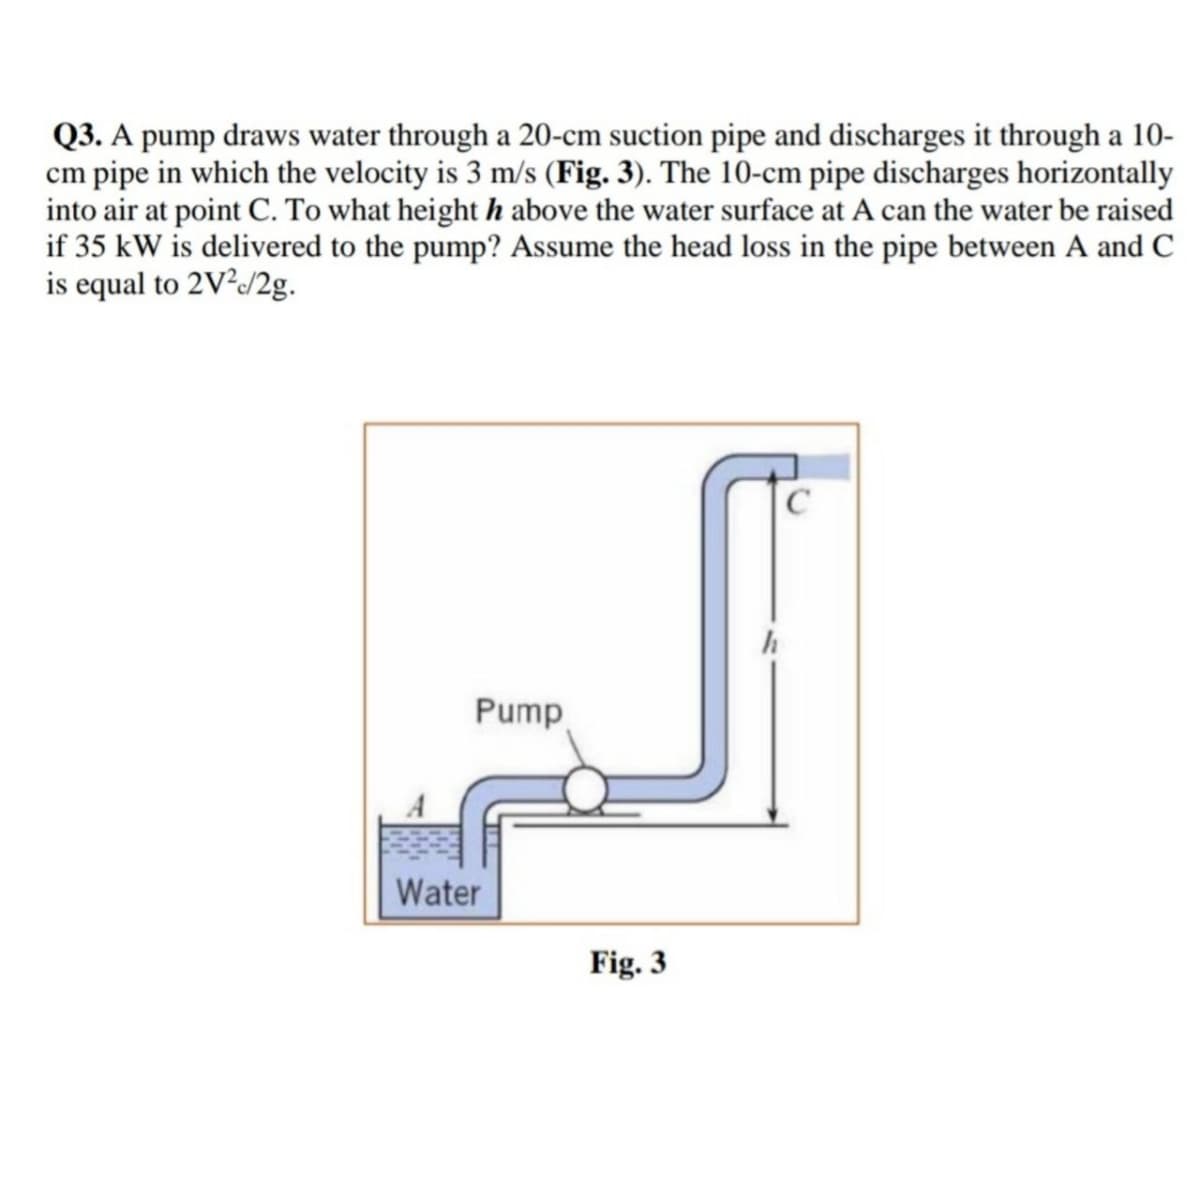 Q3. A pump draws water through a 20-cm suction pipe and discharges it through a 10-
cm pipe in which the velocity is 3 m/s (Fig. 3). The 10-cm pipe discharges horizontally
into air at point C. To what height h above the water surface at A can the water be raised
if 35 kW is delivered to the pump? Assume the head loss in the pipe between A and C
is equal to 2V²J/2g.
Pump
Water
Fig. 3
